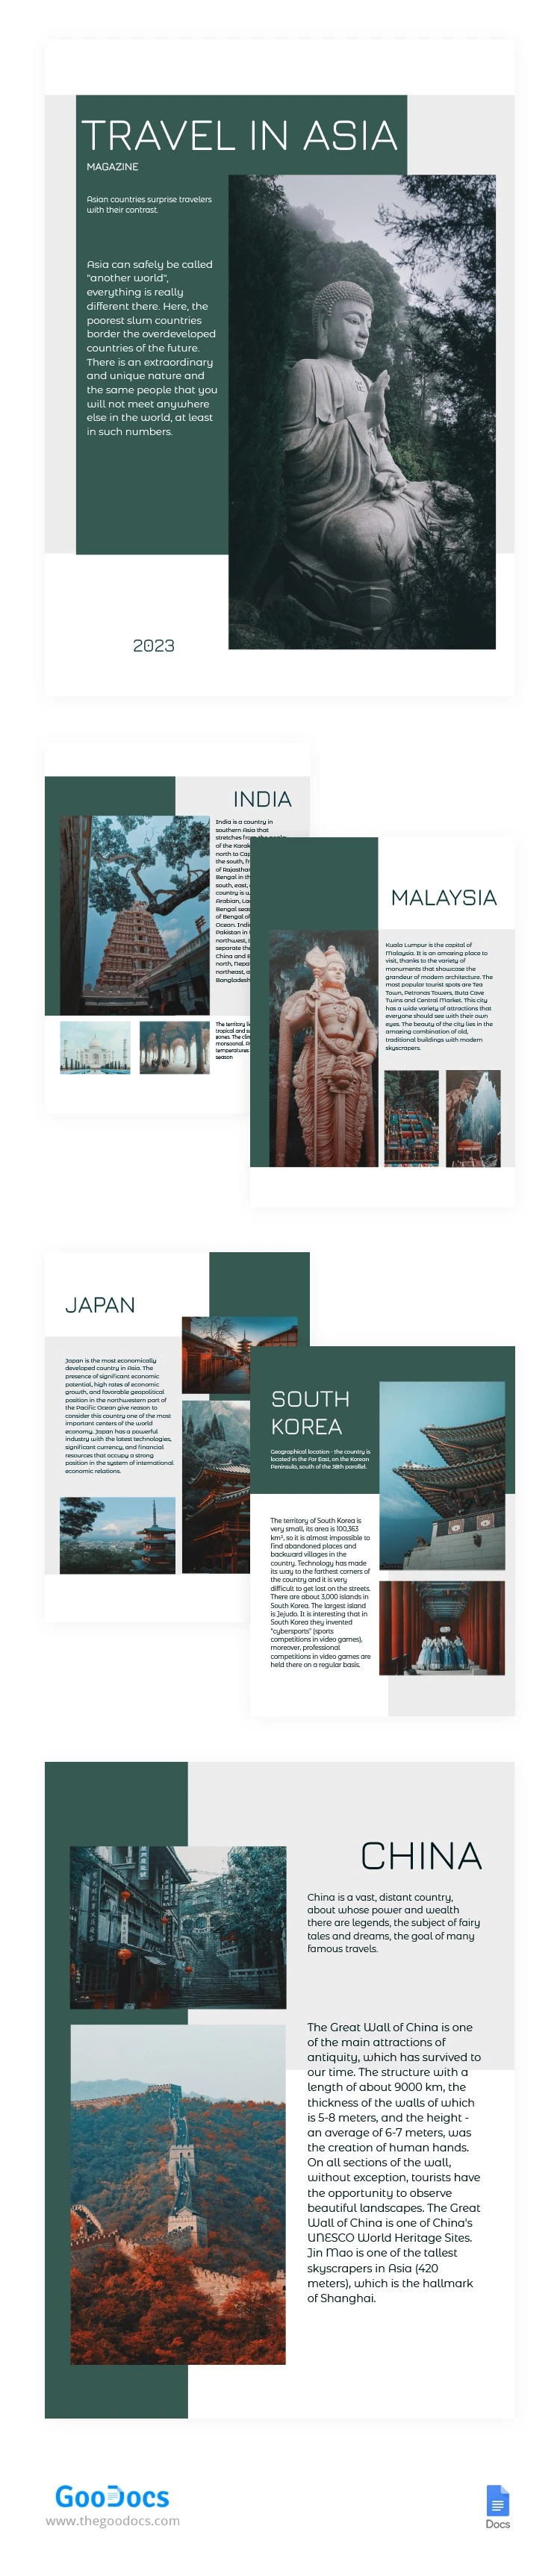 Travel in Asia Magazine - free Google Docs Template - 10064796